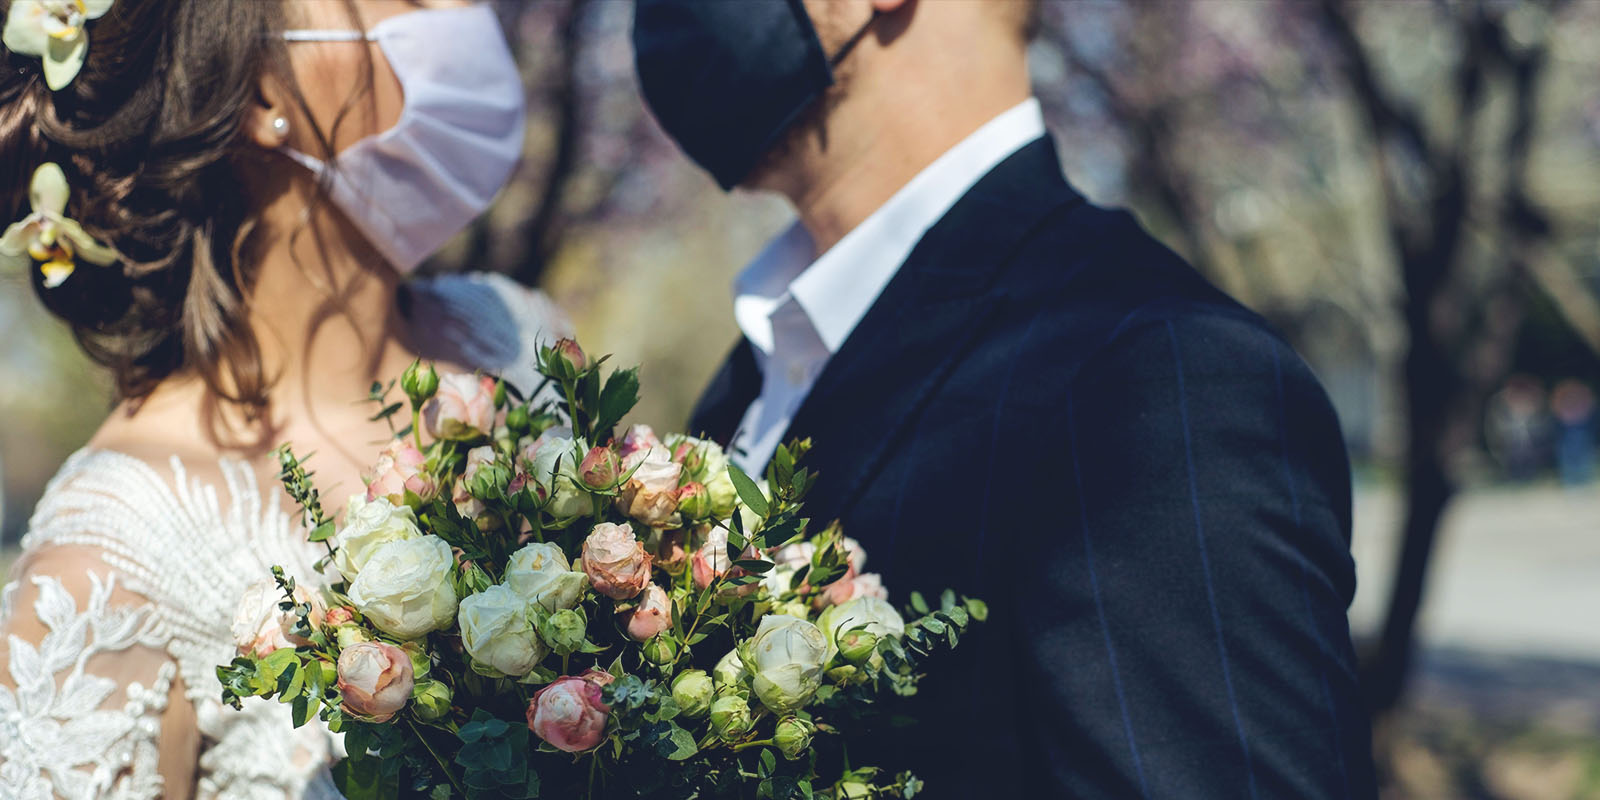 Wedding Traditions in Changing Times